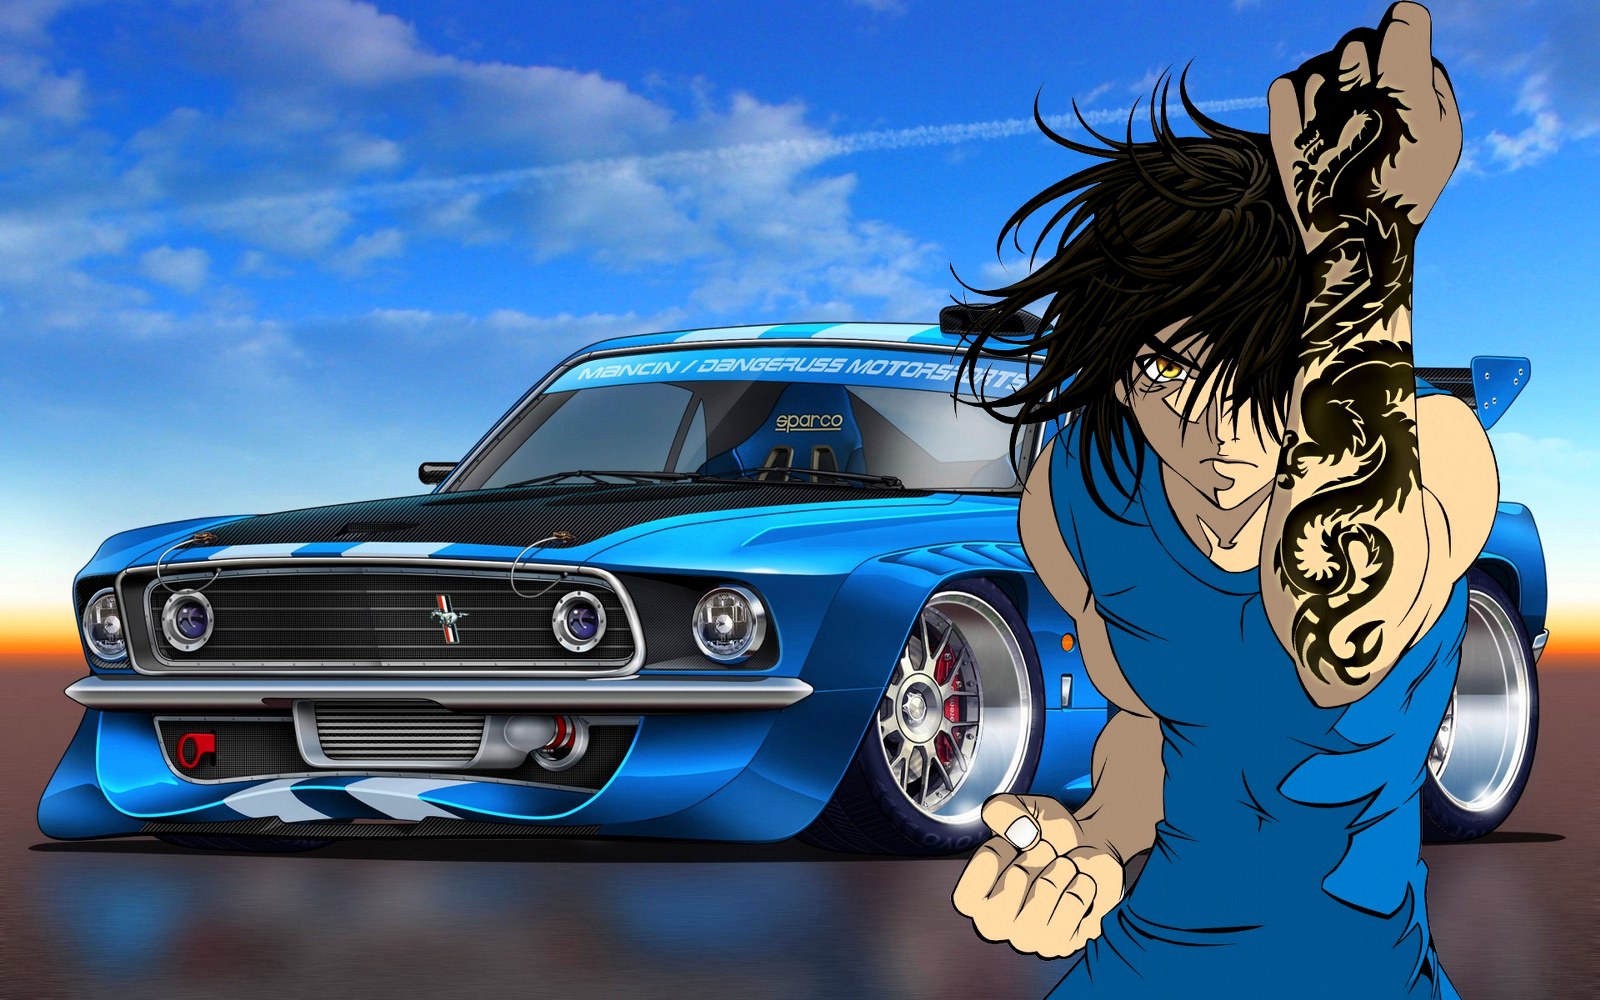 Boy And Racer Car Cartoon | wallpapers55.com - Best Wallpapers for ...